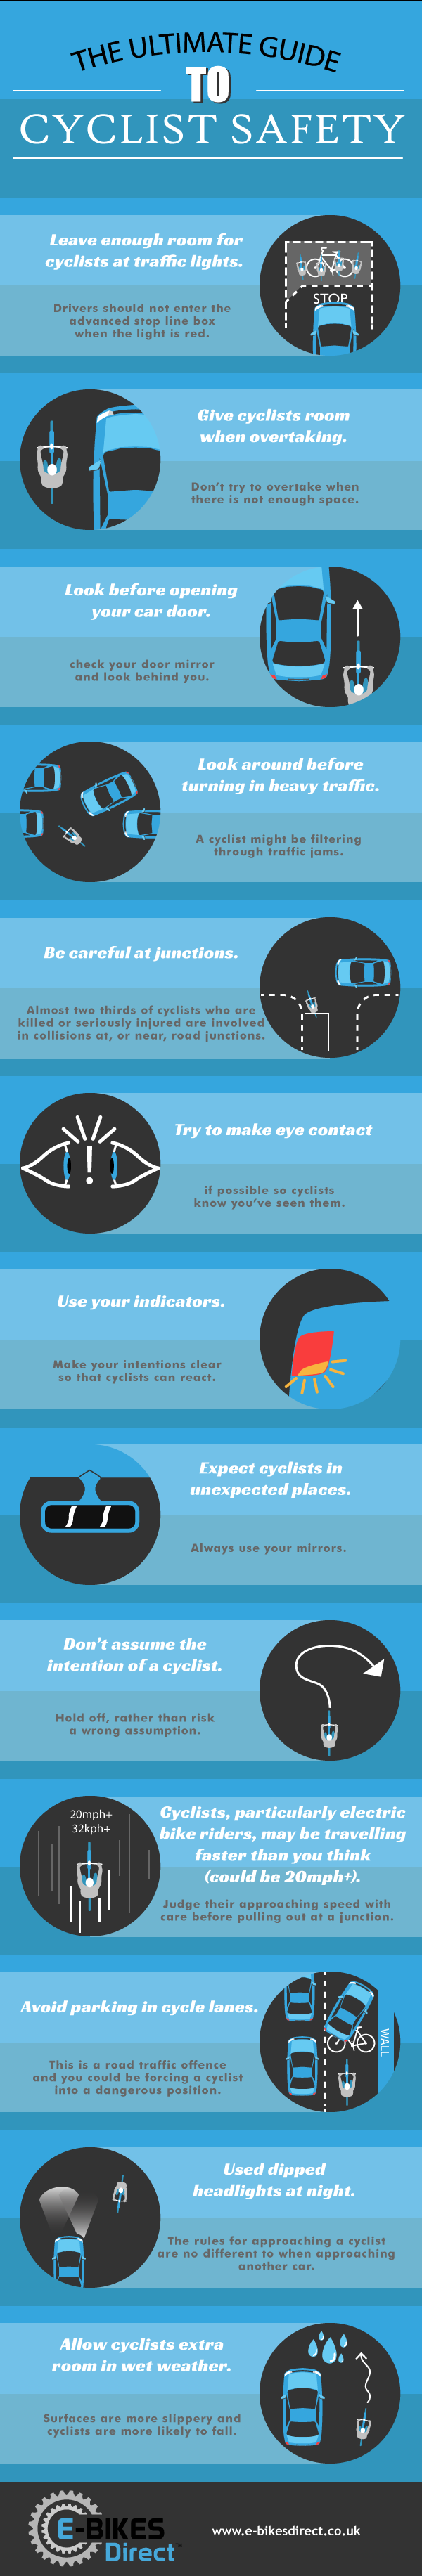 The Ultimate Guide to Cyclist Safety